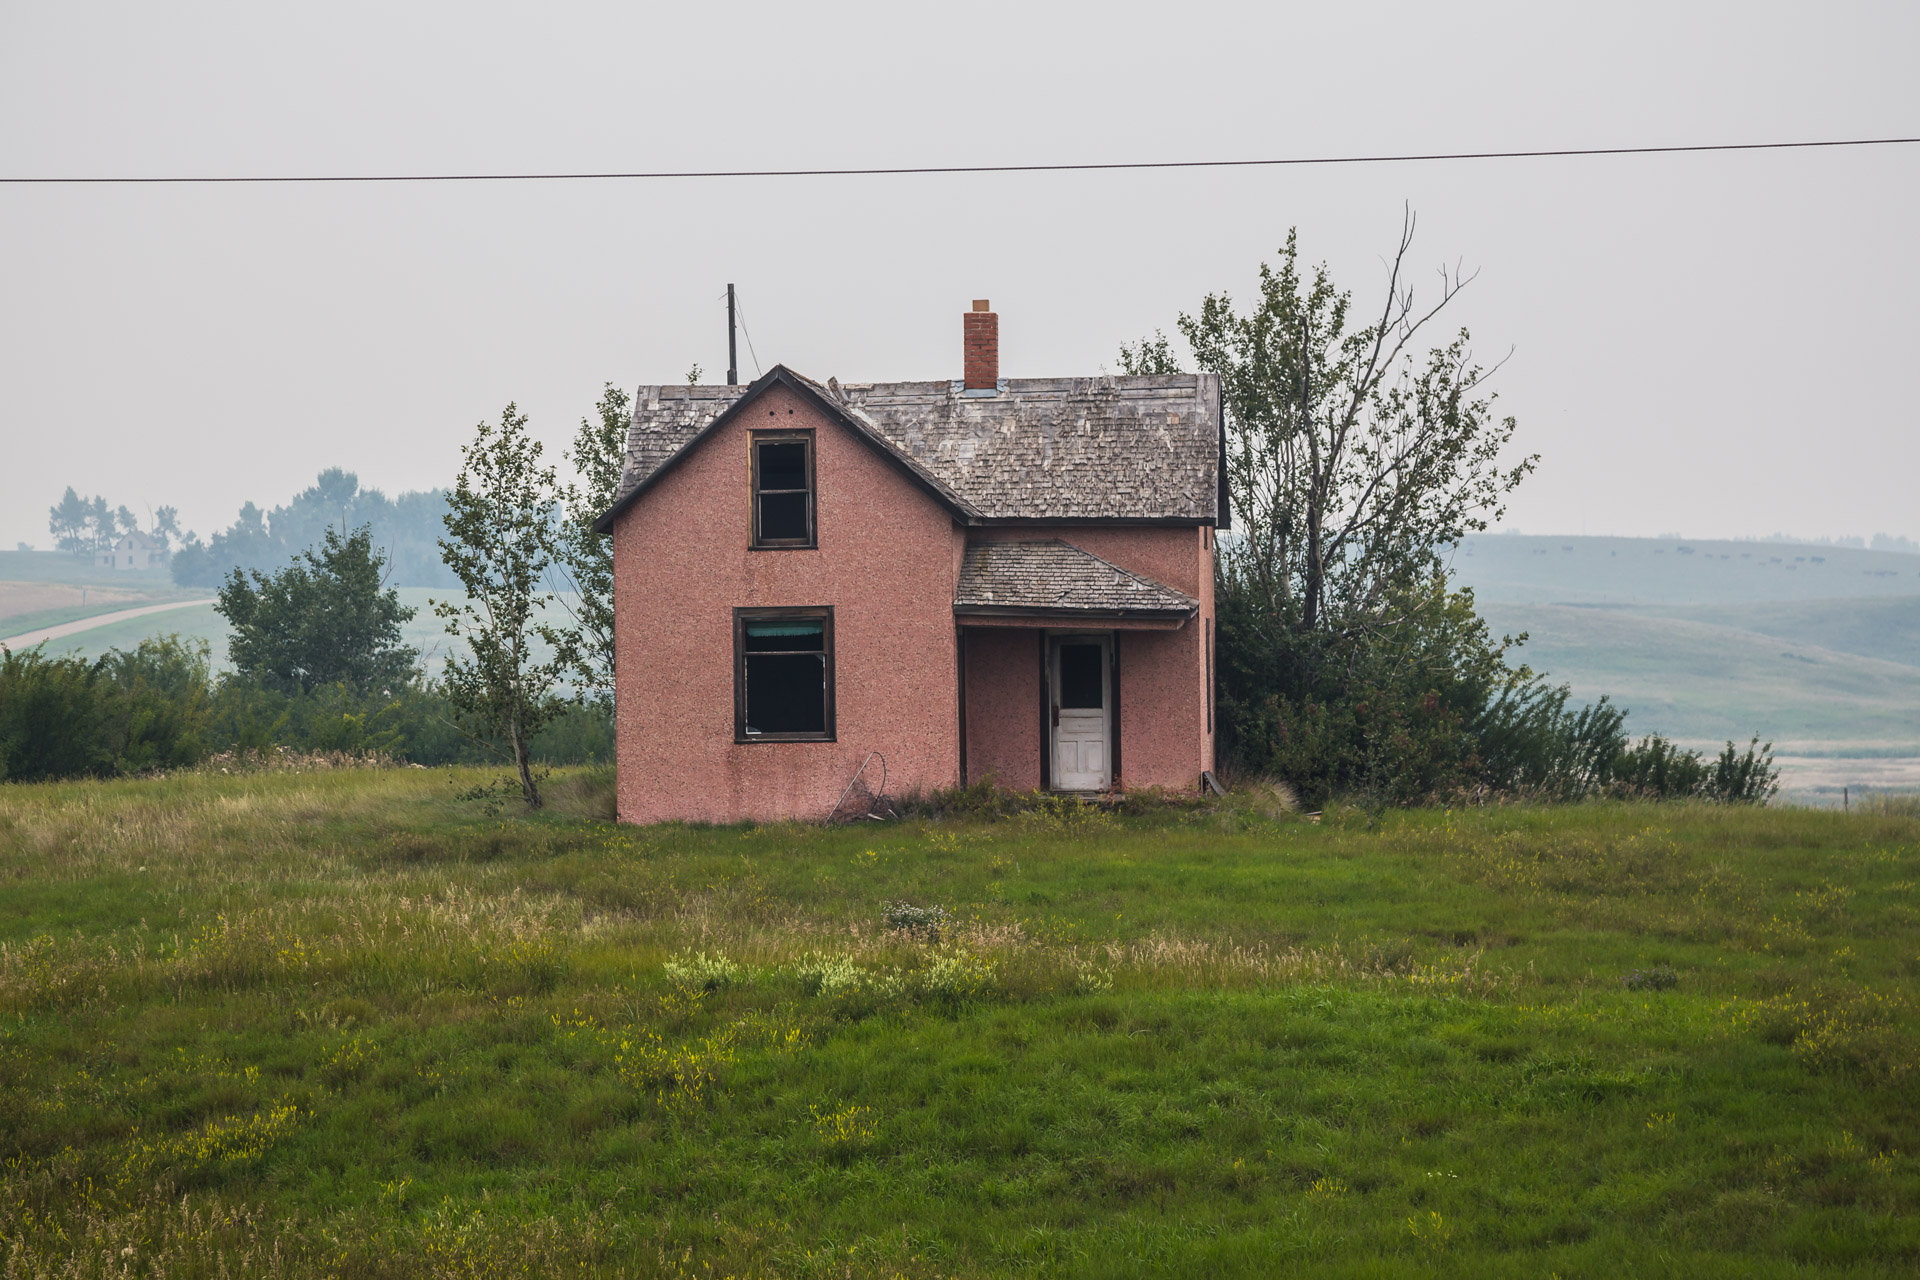 Smokey Pink House (middle left)